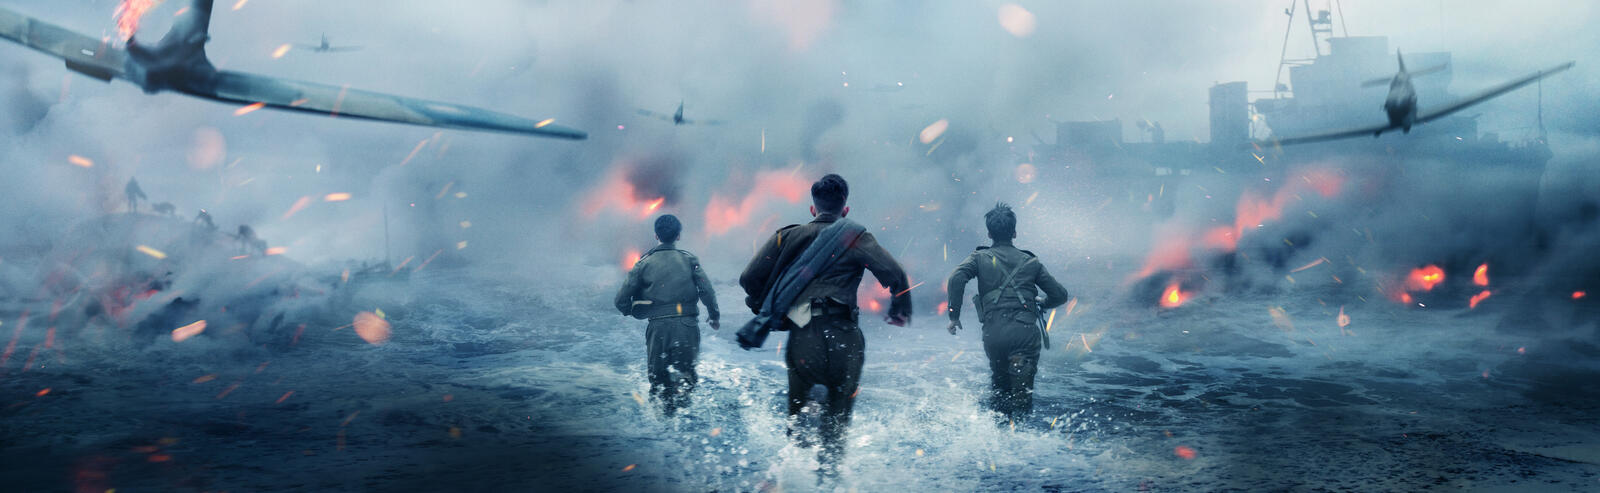 Wallpapers movies dunkirk 2017 Movies on the desktop